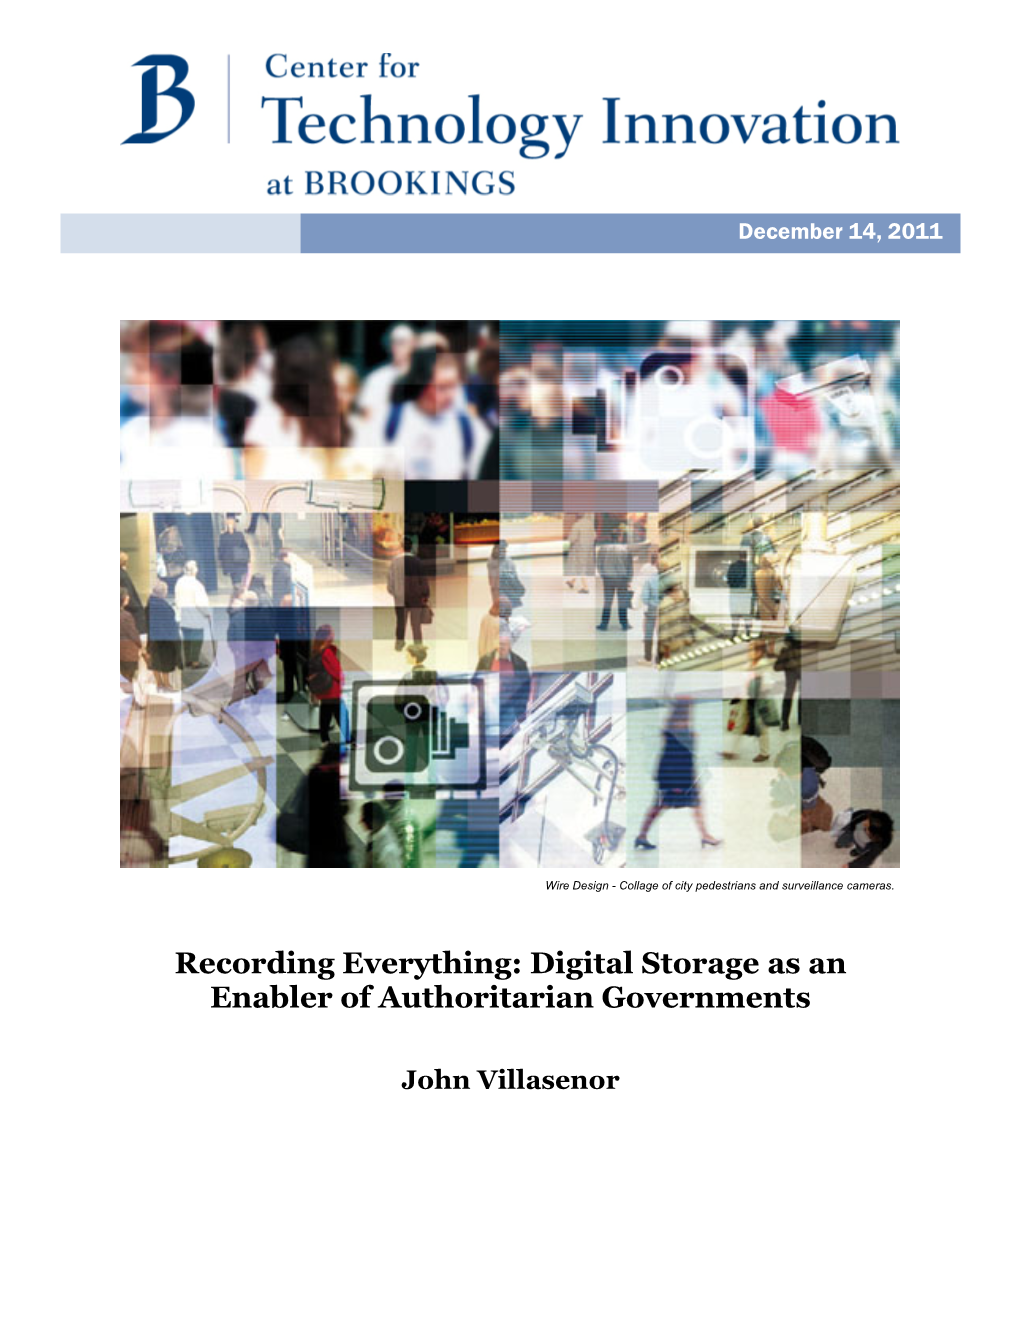 Recording Everything: Digital Storage As an Enabler of Authoritarian Governments